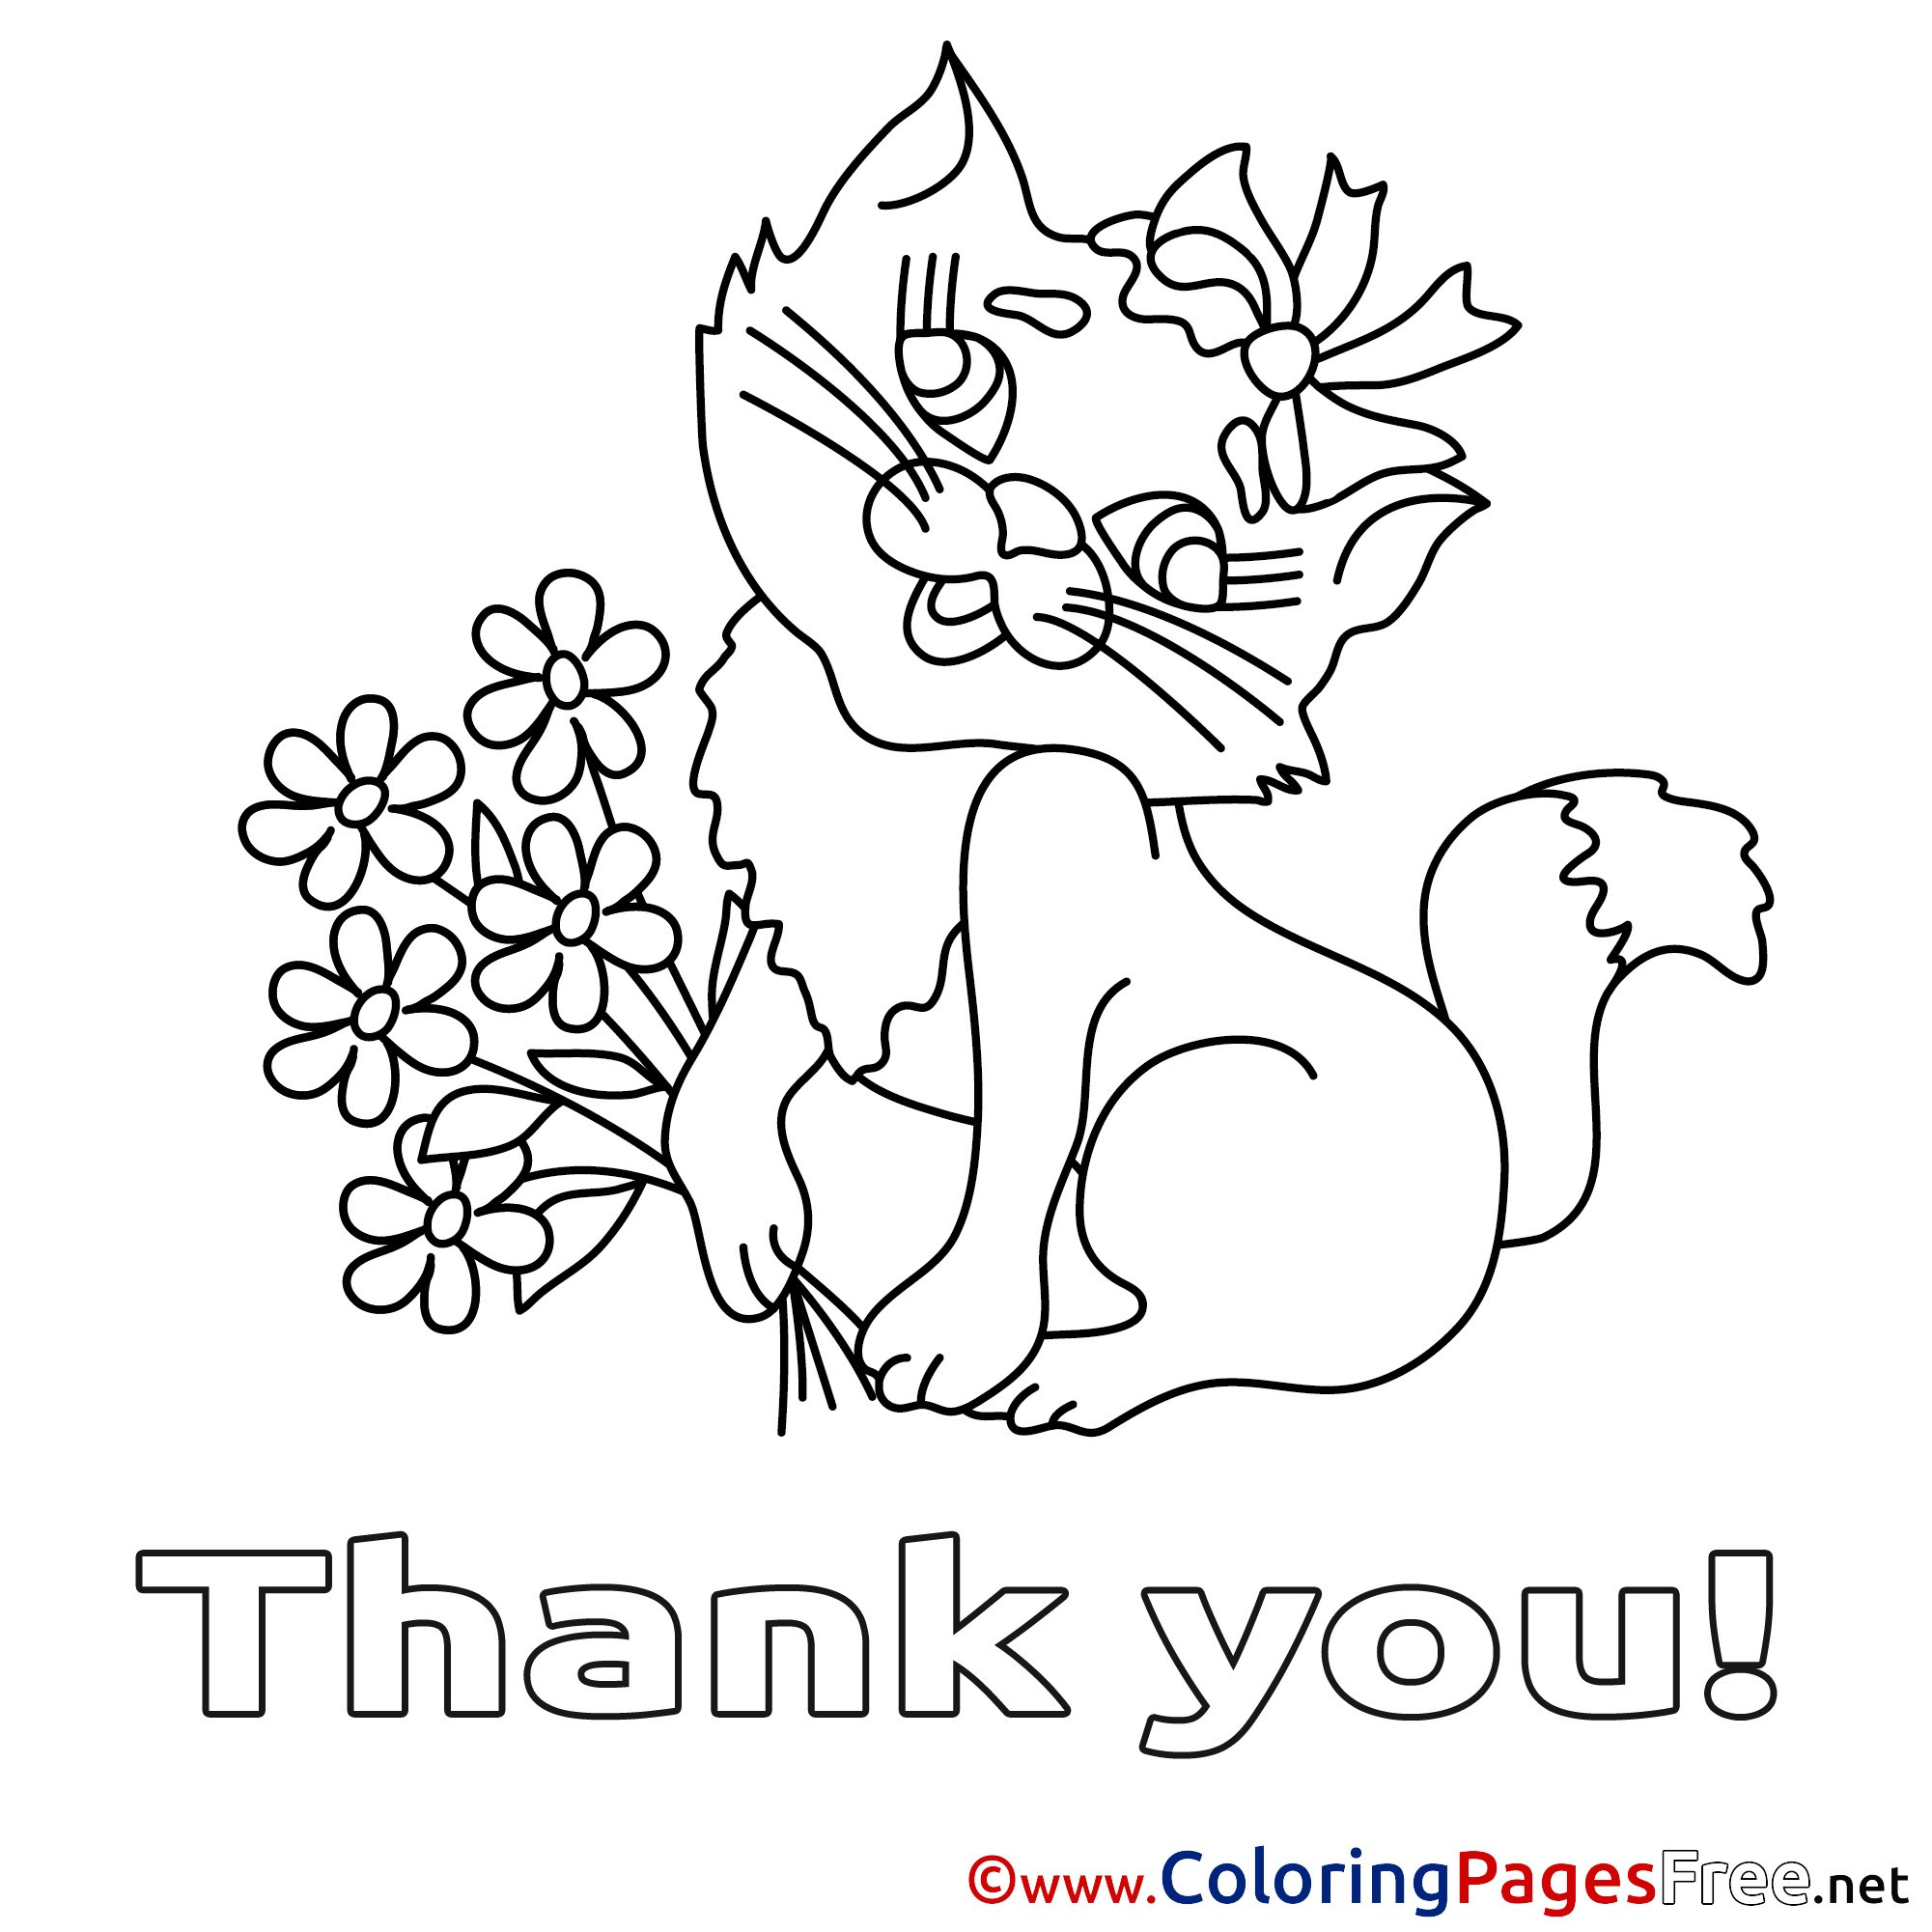 Thank You Coloring Pages For Kids at GetDrawings | Free download